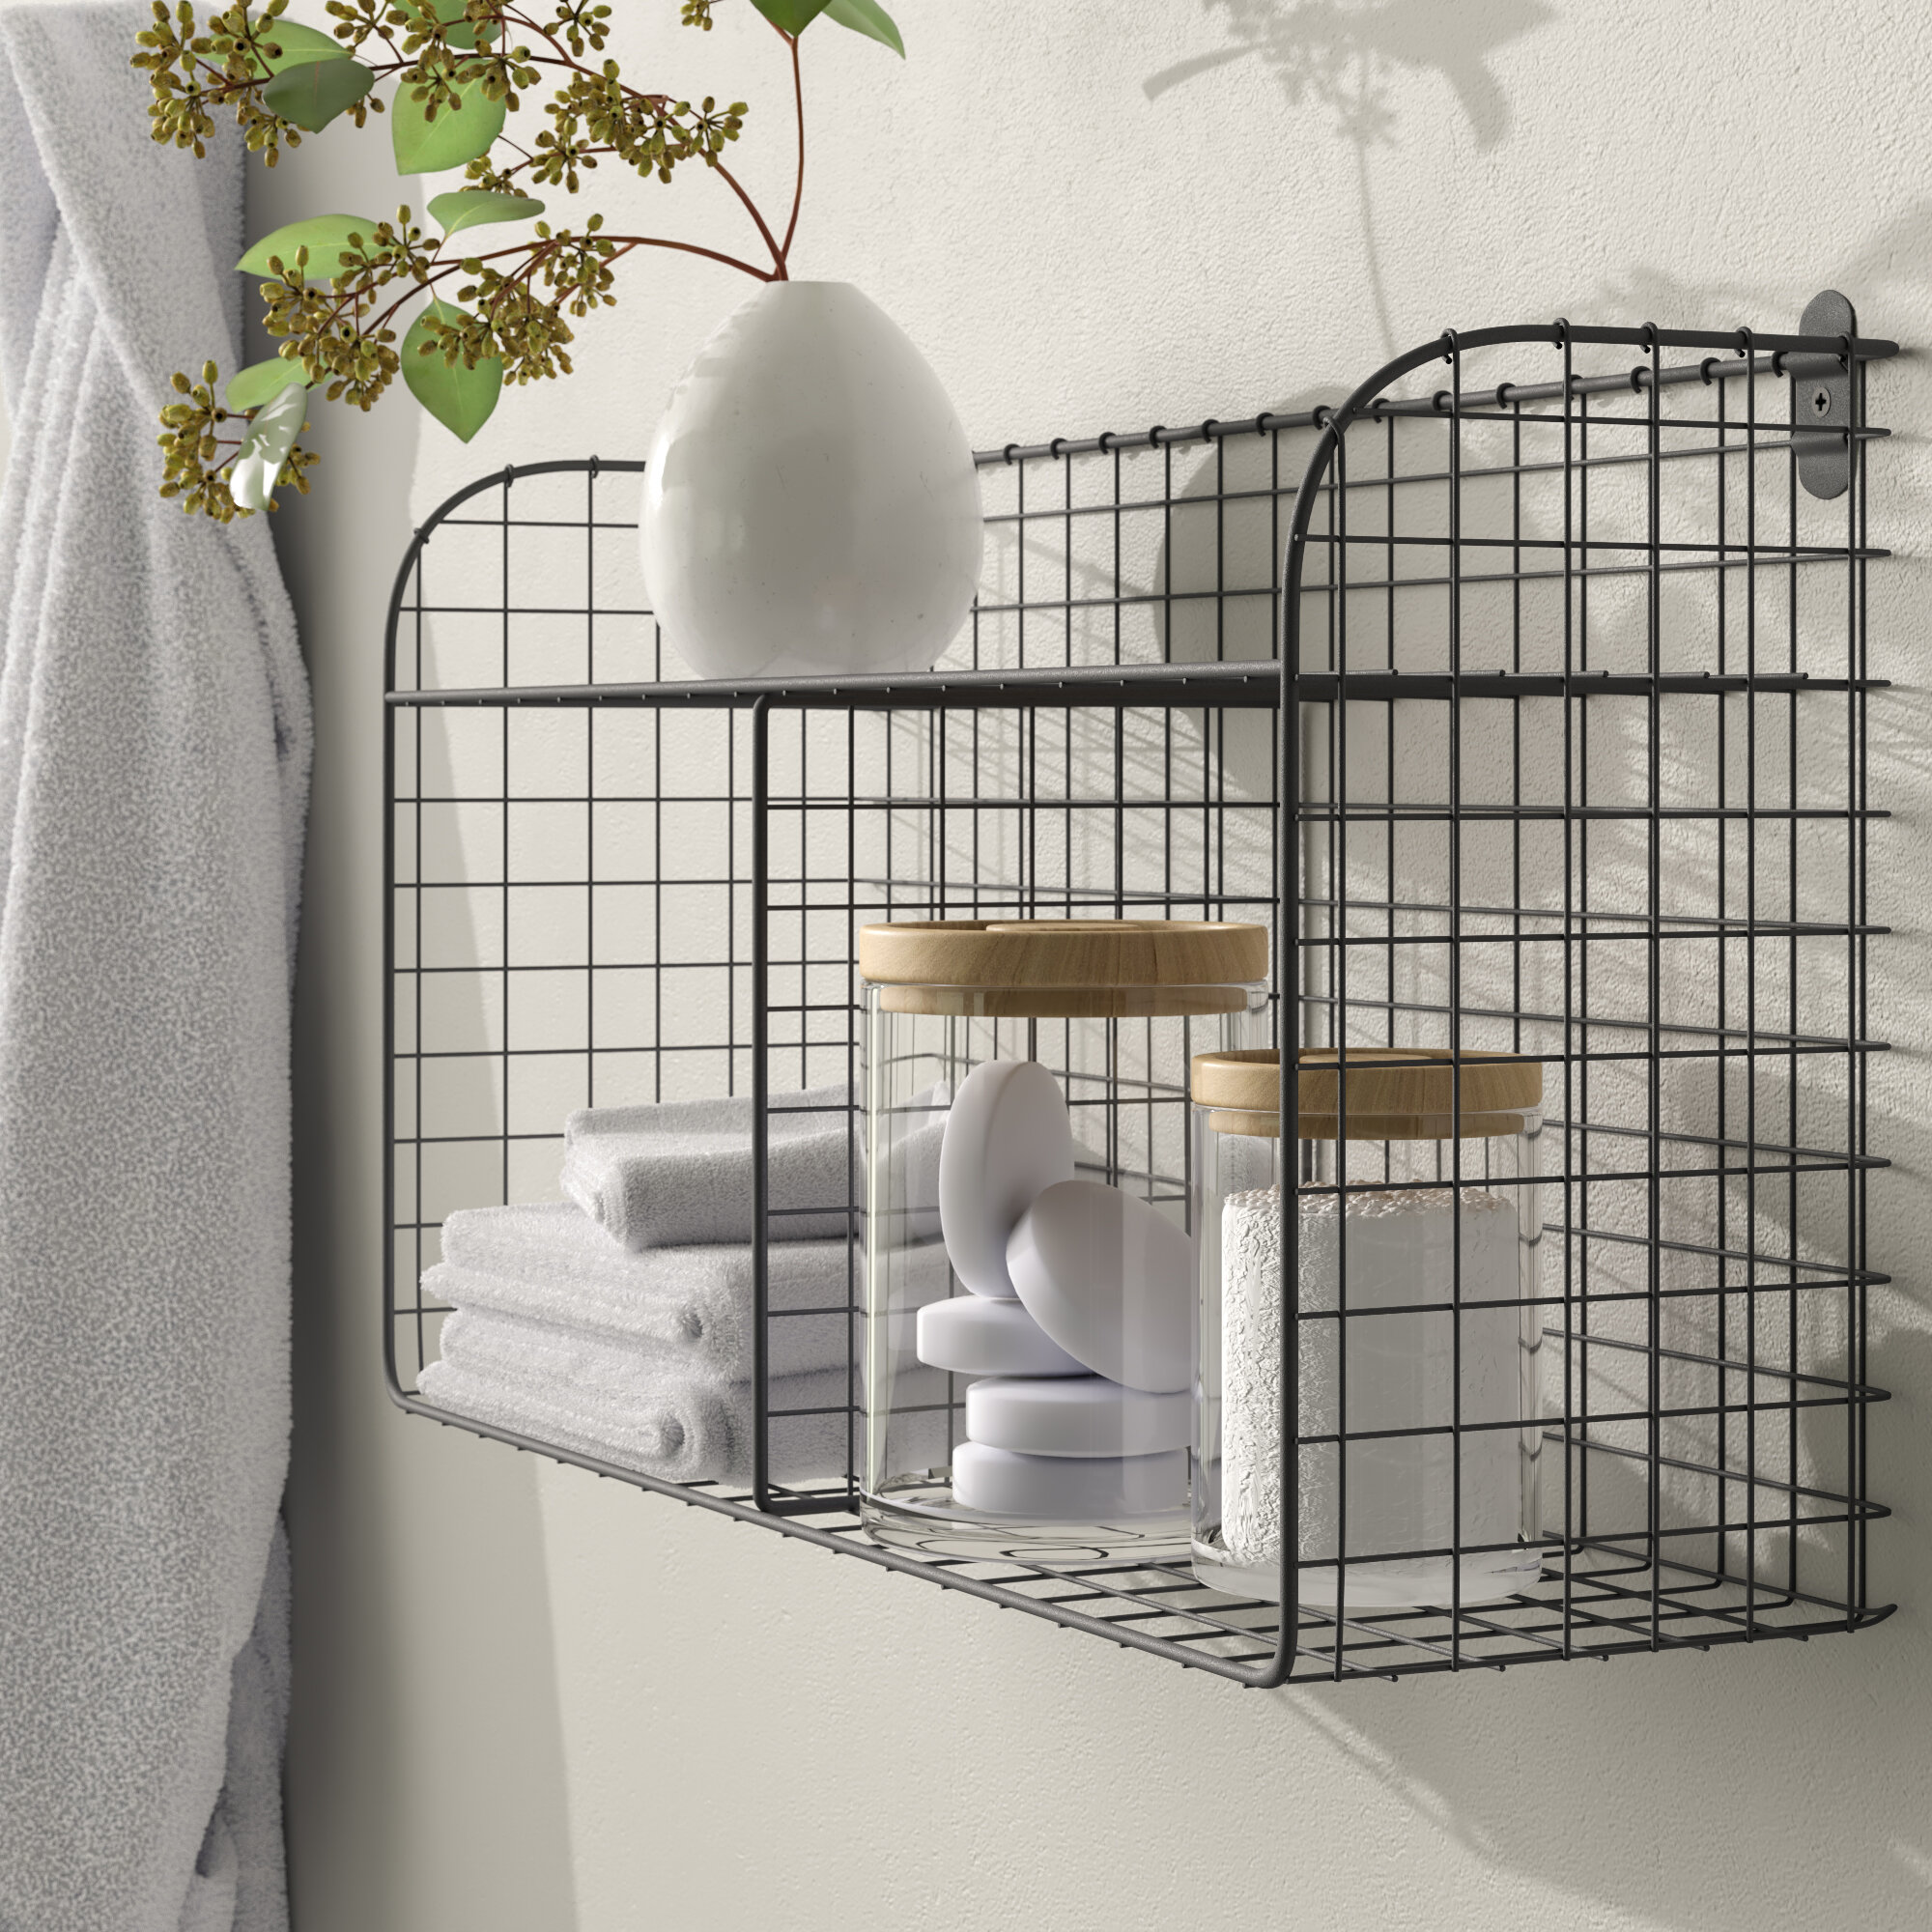 Mesh Shower Organizer Hanging Bathroom 8 Pockets Hang Curtain Rod With 3  Rings,Wall Hanging Dormitory Classroom Hanging Bag, Suitable For Office,  Classroom, Dormitory, Toy Storage, Bathroom Storage